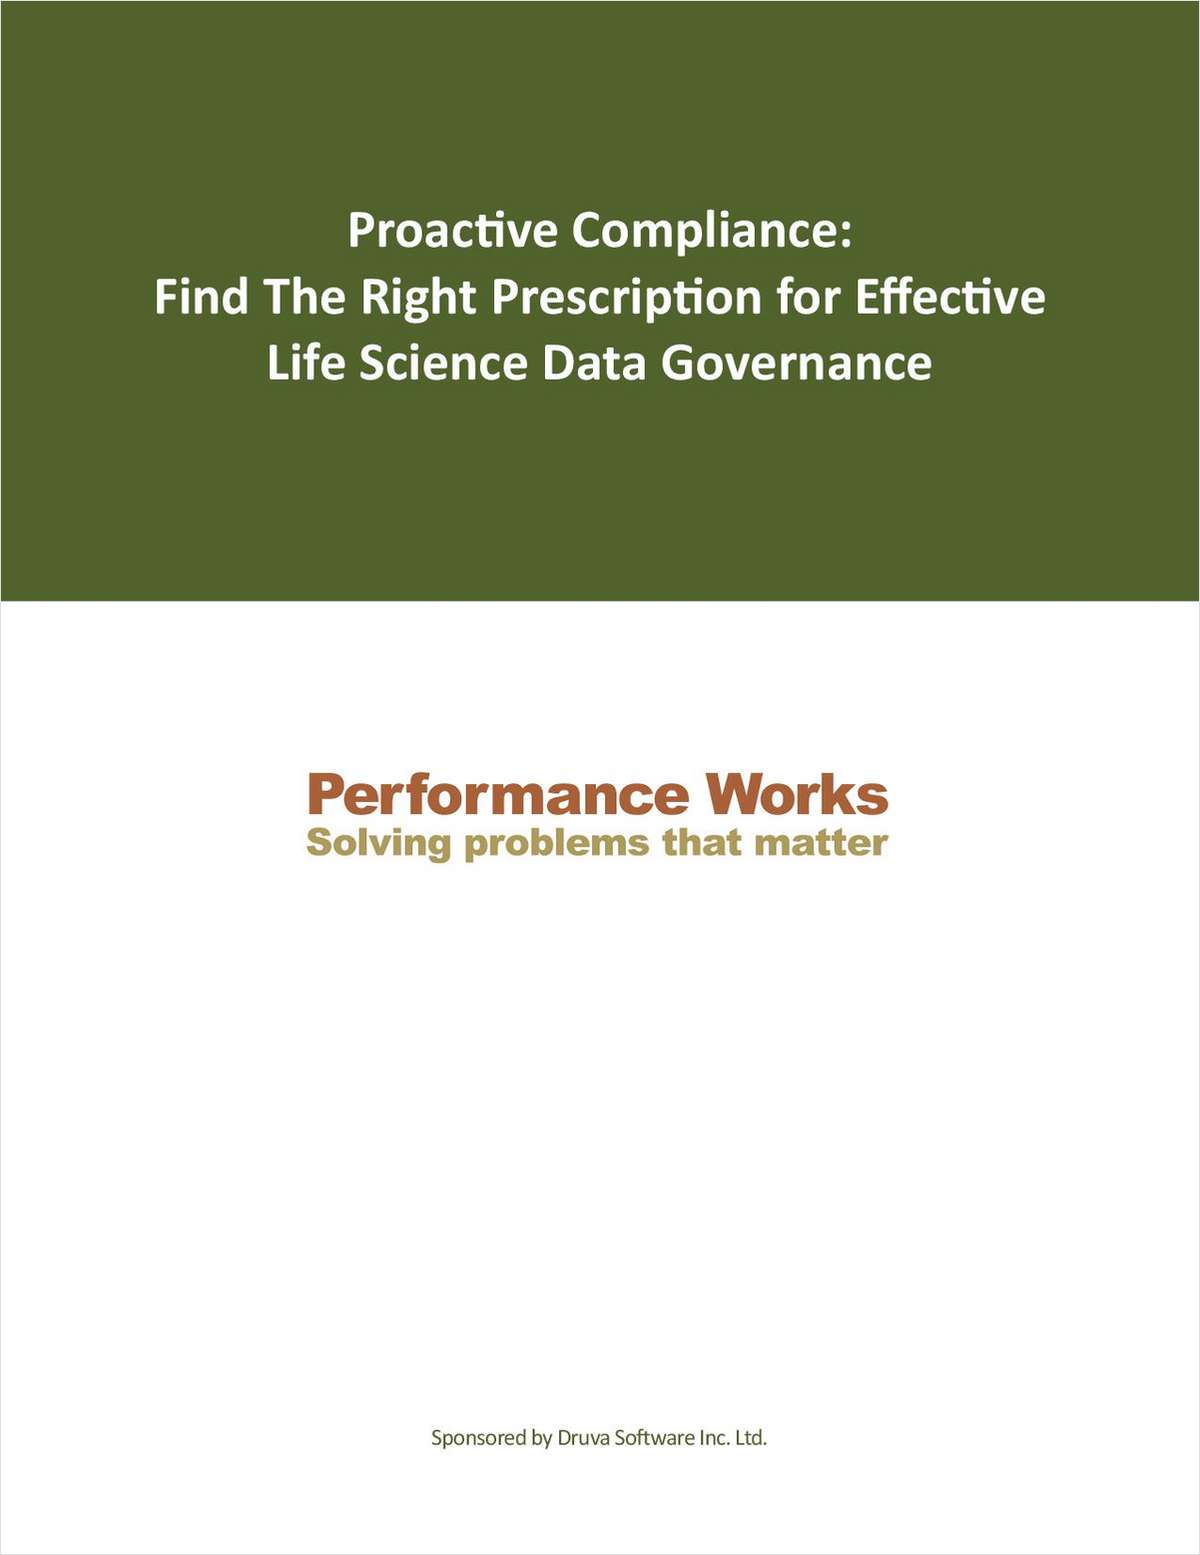 Proactive Compliance: Find The Right Prescription for Effective Life Science Data Governance